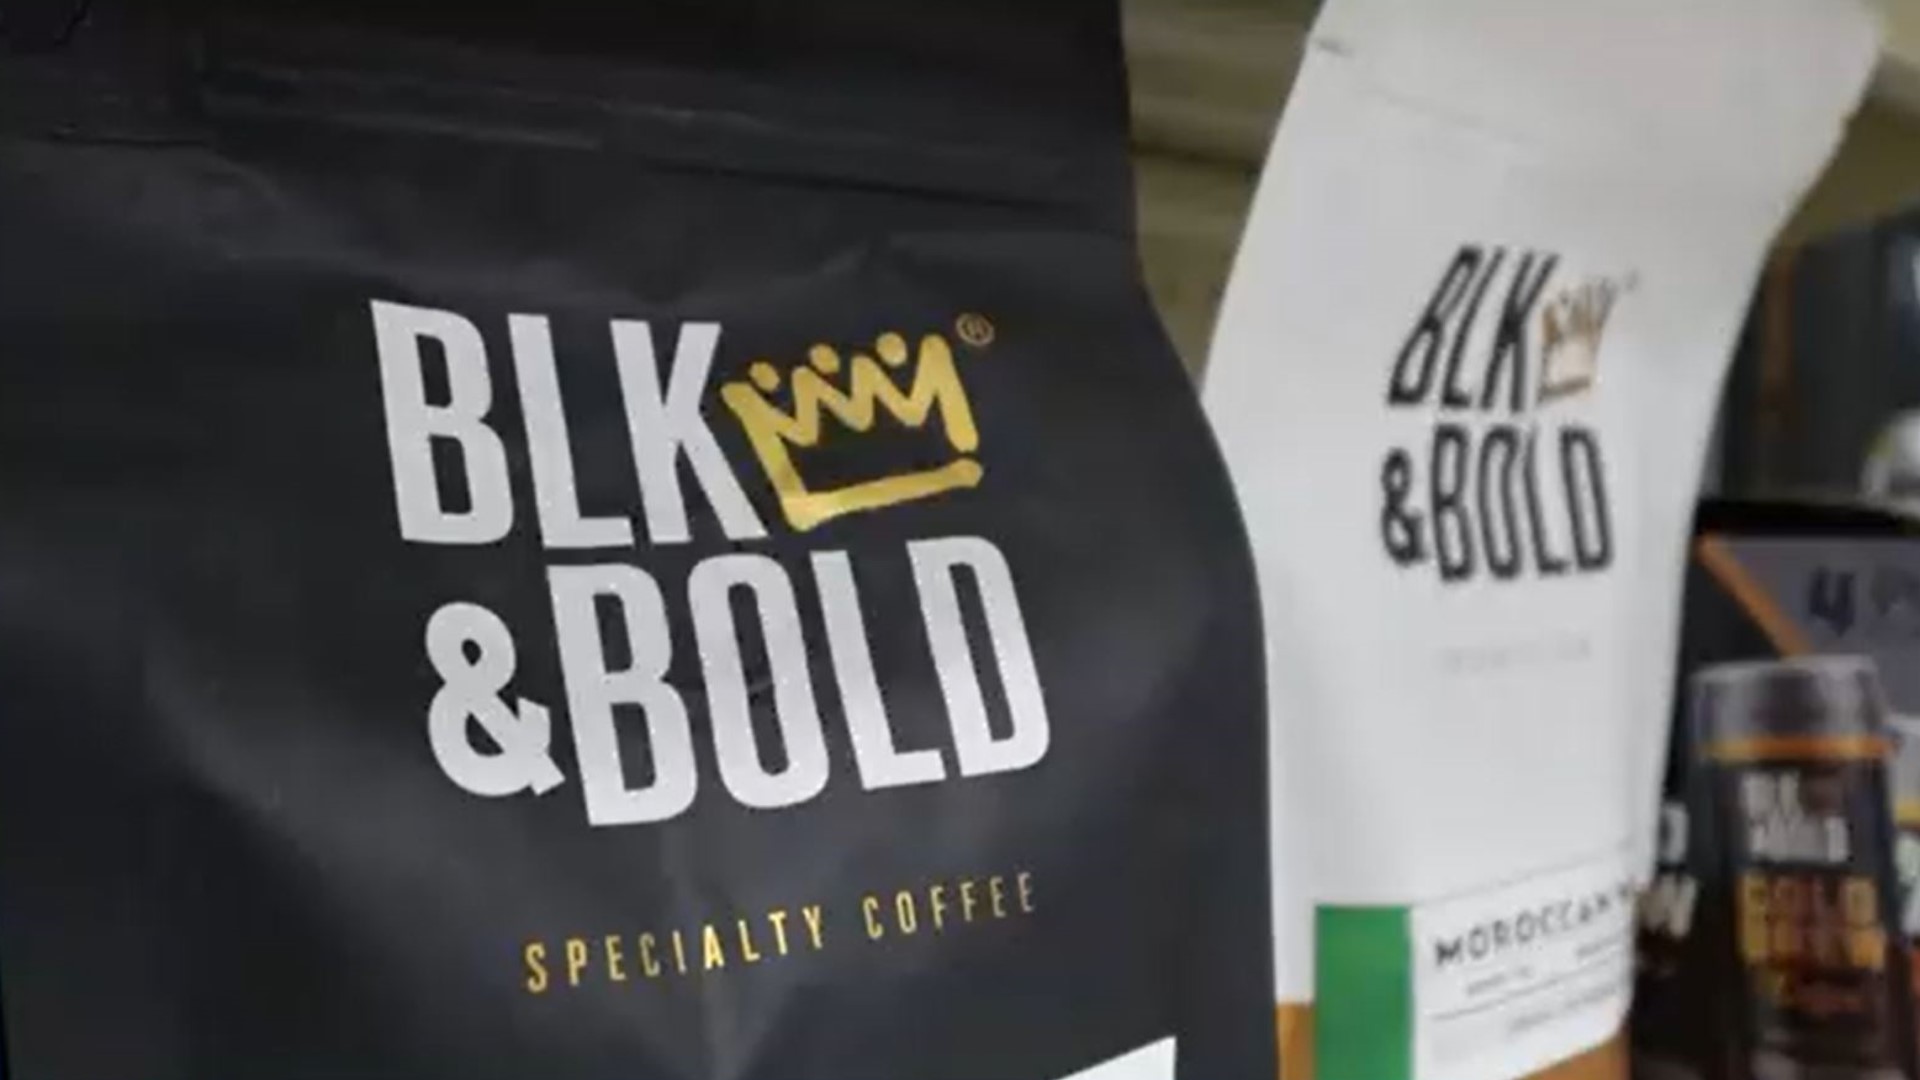 Through the BLK & Bold Foundation, the company aims to empower millions of youth around the country.